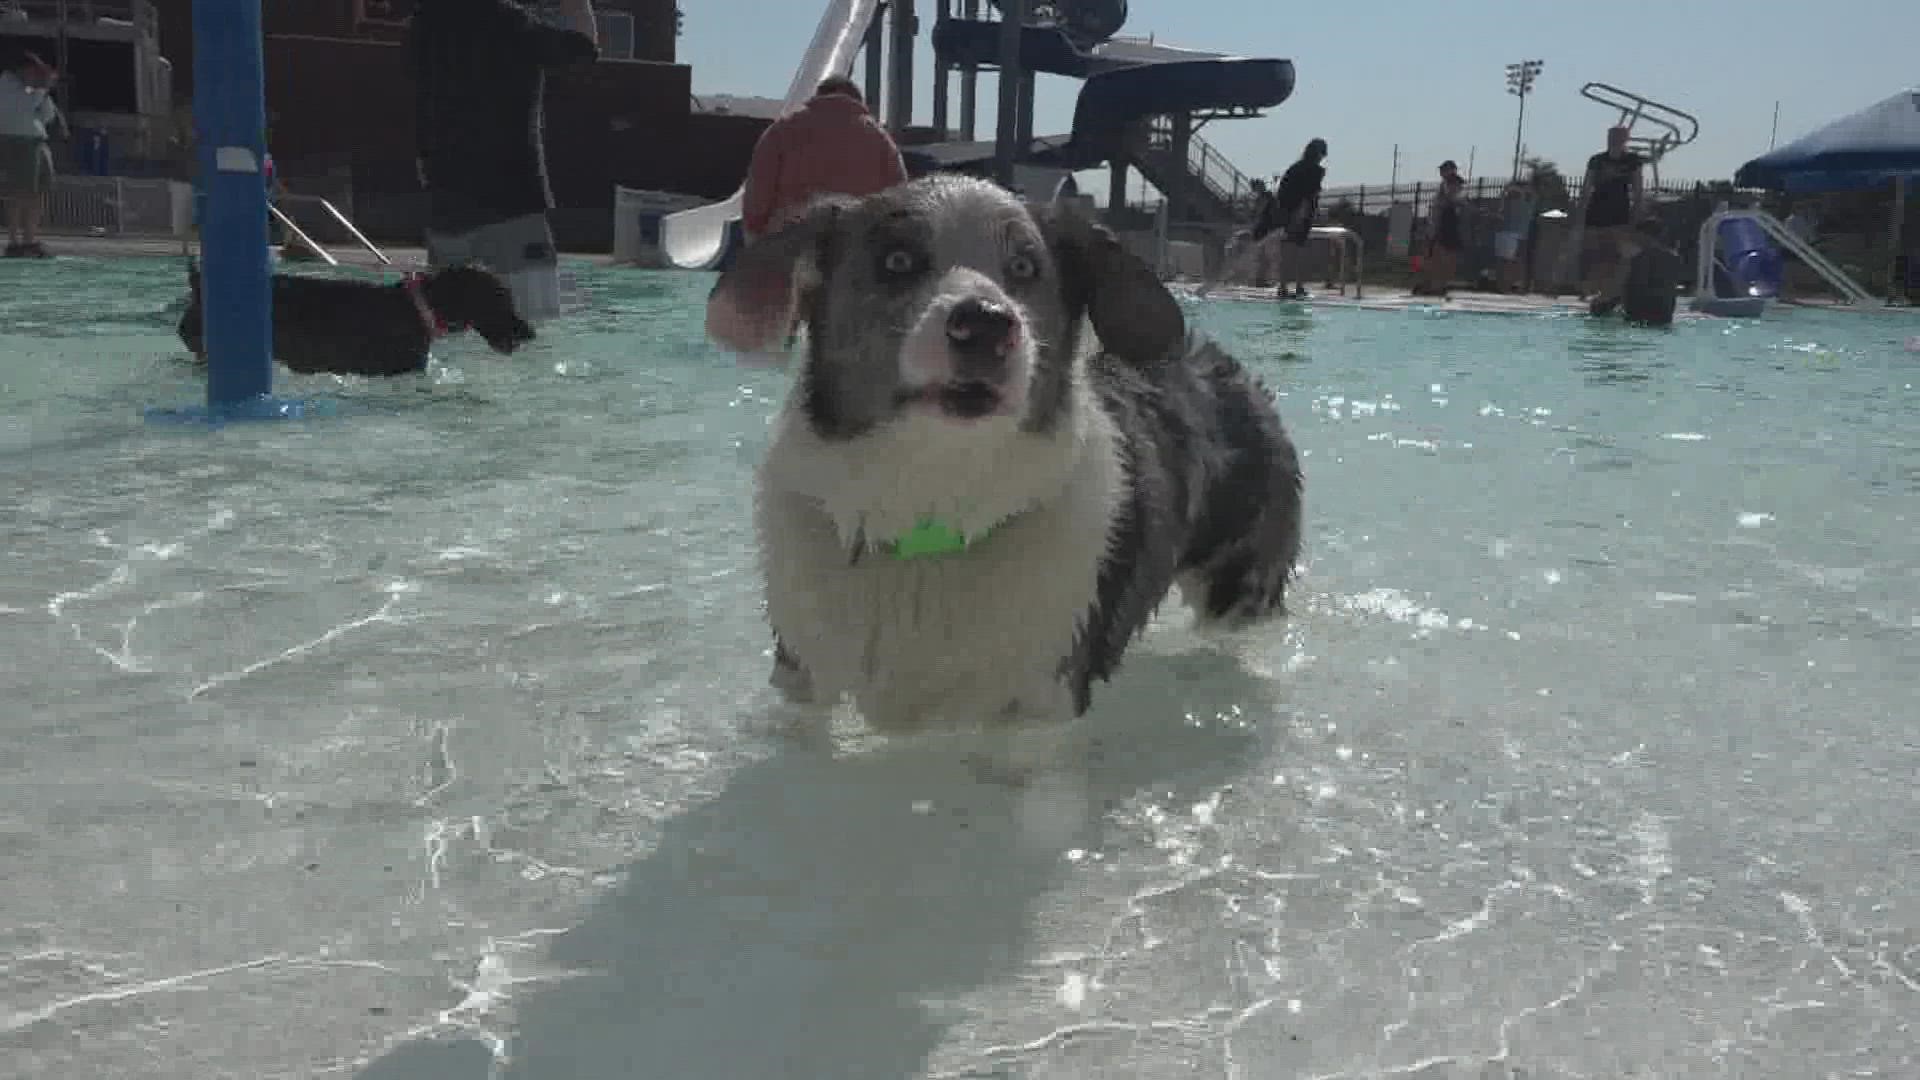 Dozens of nervous, excited dogs take over the public pool for one day after it closes for the season.